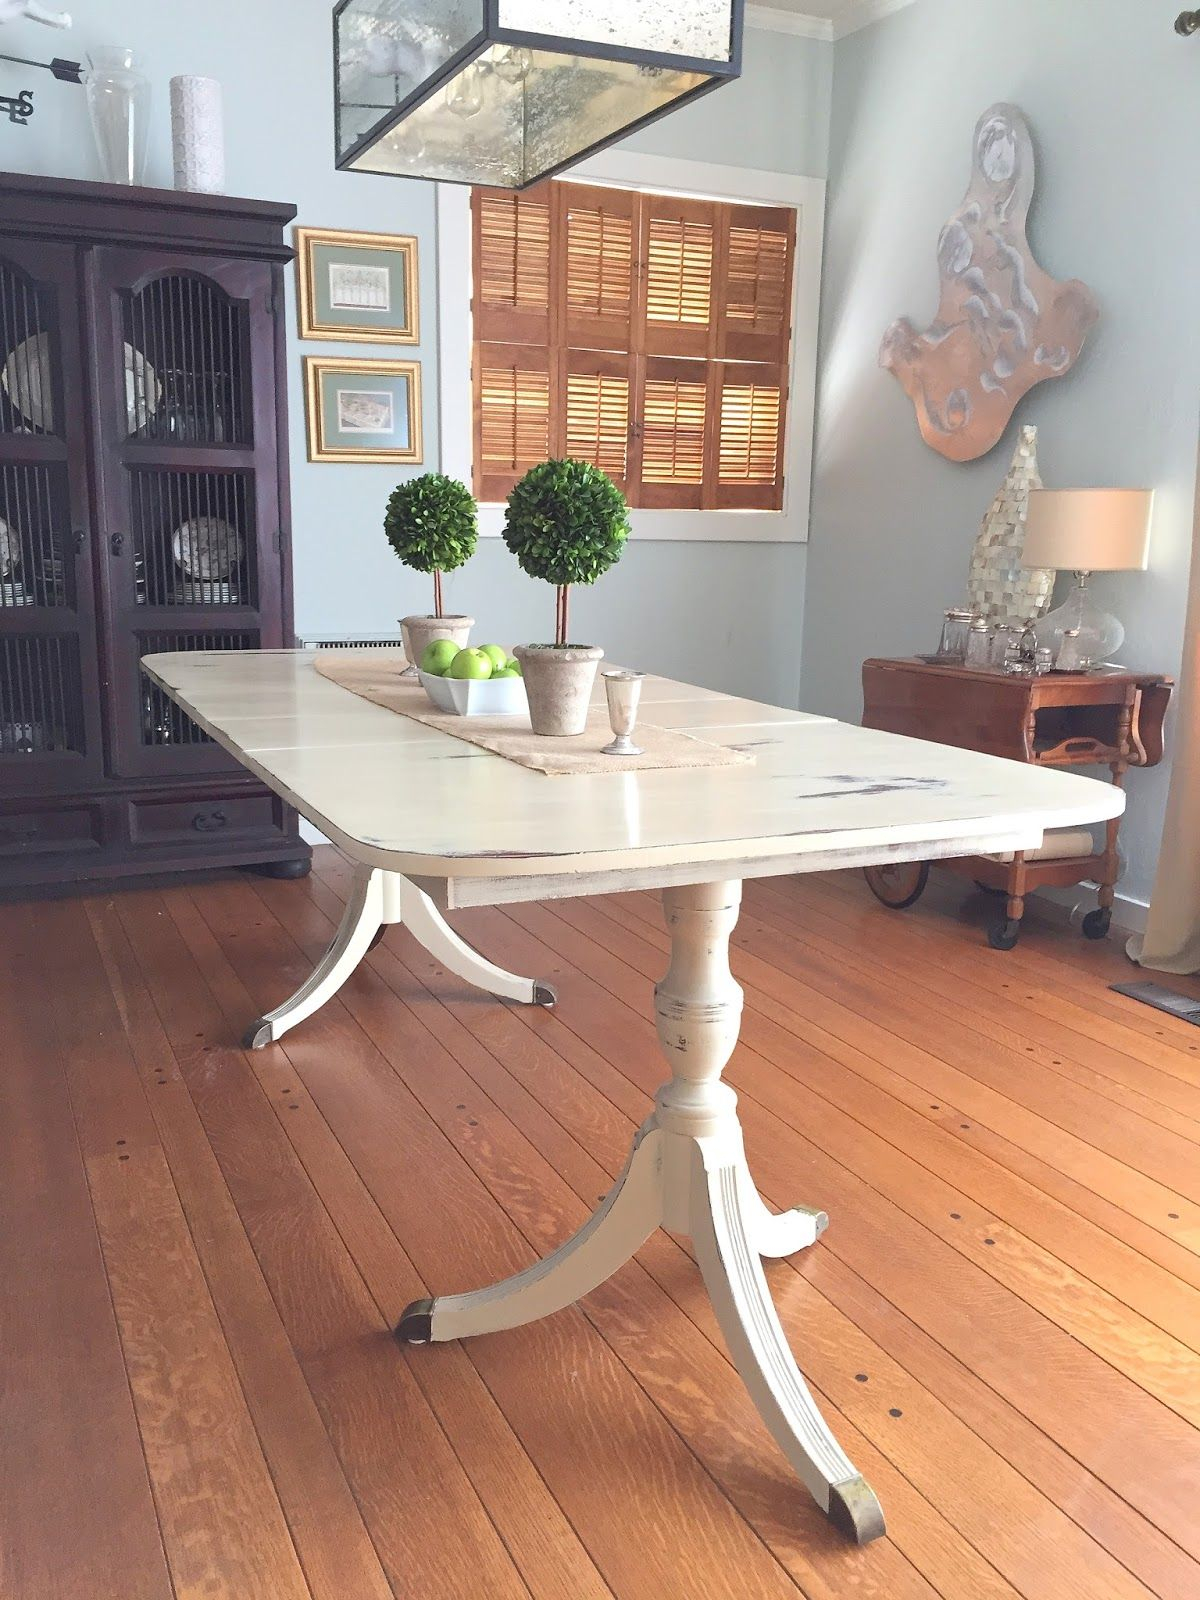 Duncan Phyfe Dining Table Painted With Annie Sloan Chalk in dimensions 1200 X 1600